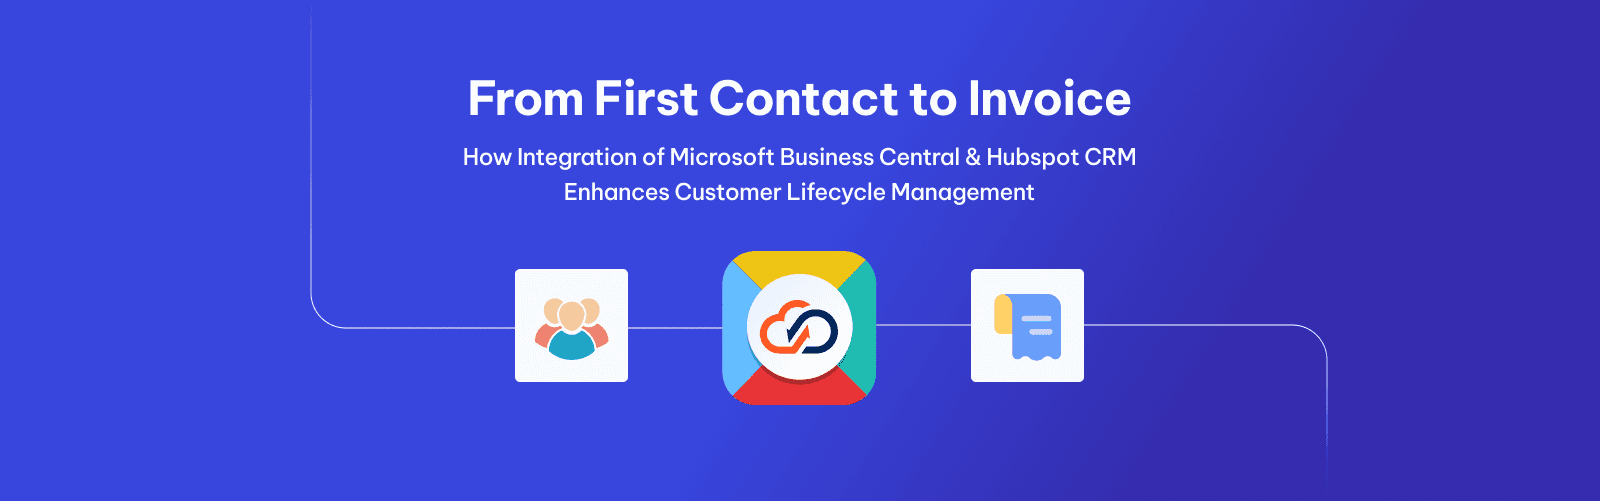 Integration of Microsoft Business Central & Hubspot CRM Enhances Customer Lifecycle Management